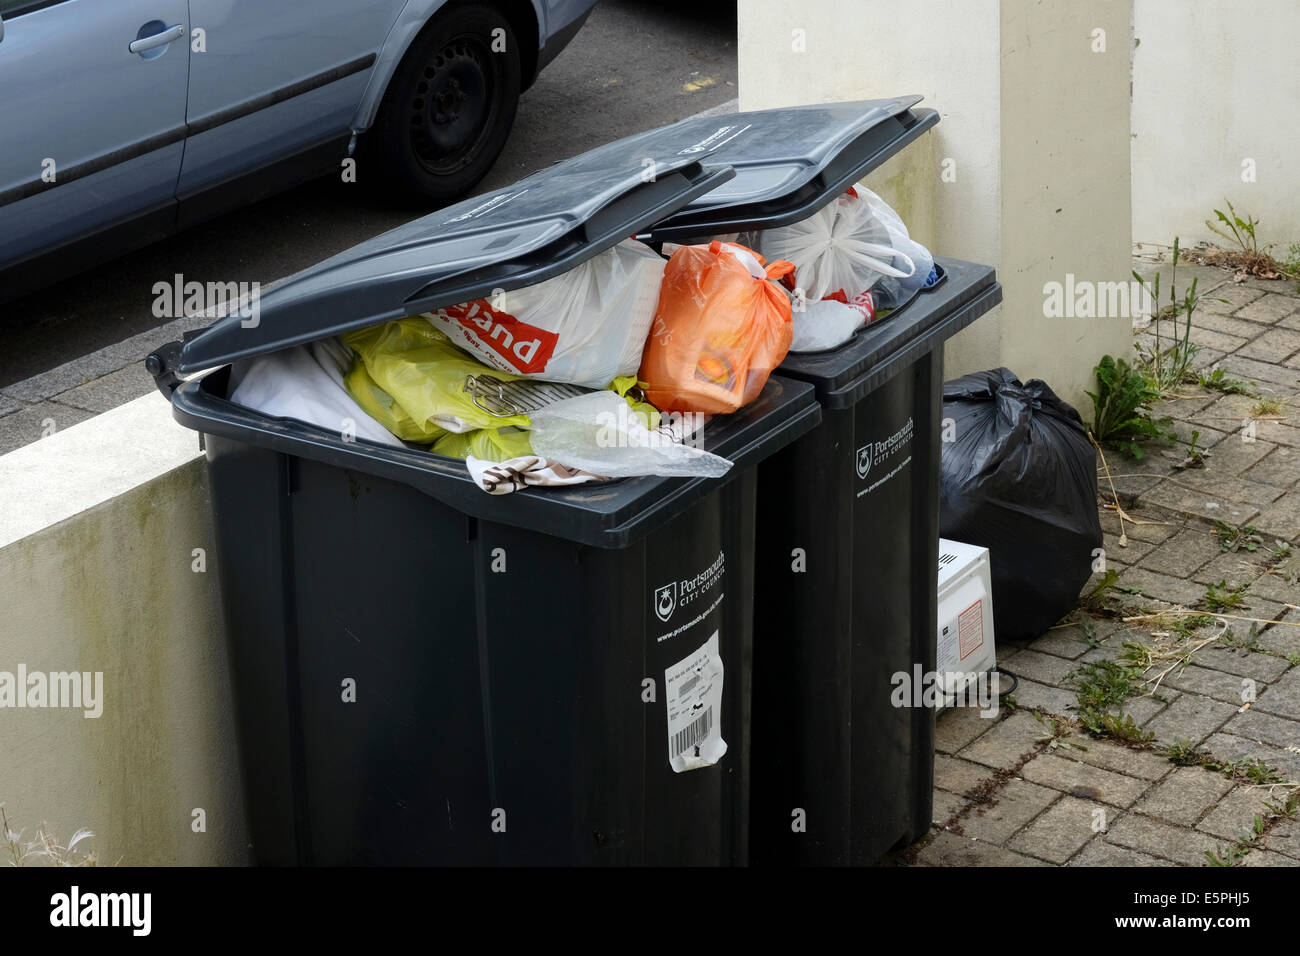 domestic wheelie bins overflowing with rubbish awaiting collection and emptying england uk Stock Photo